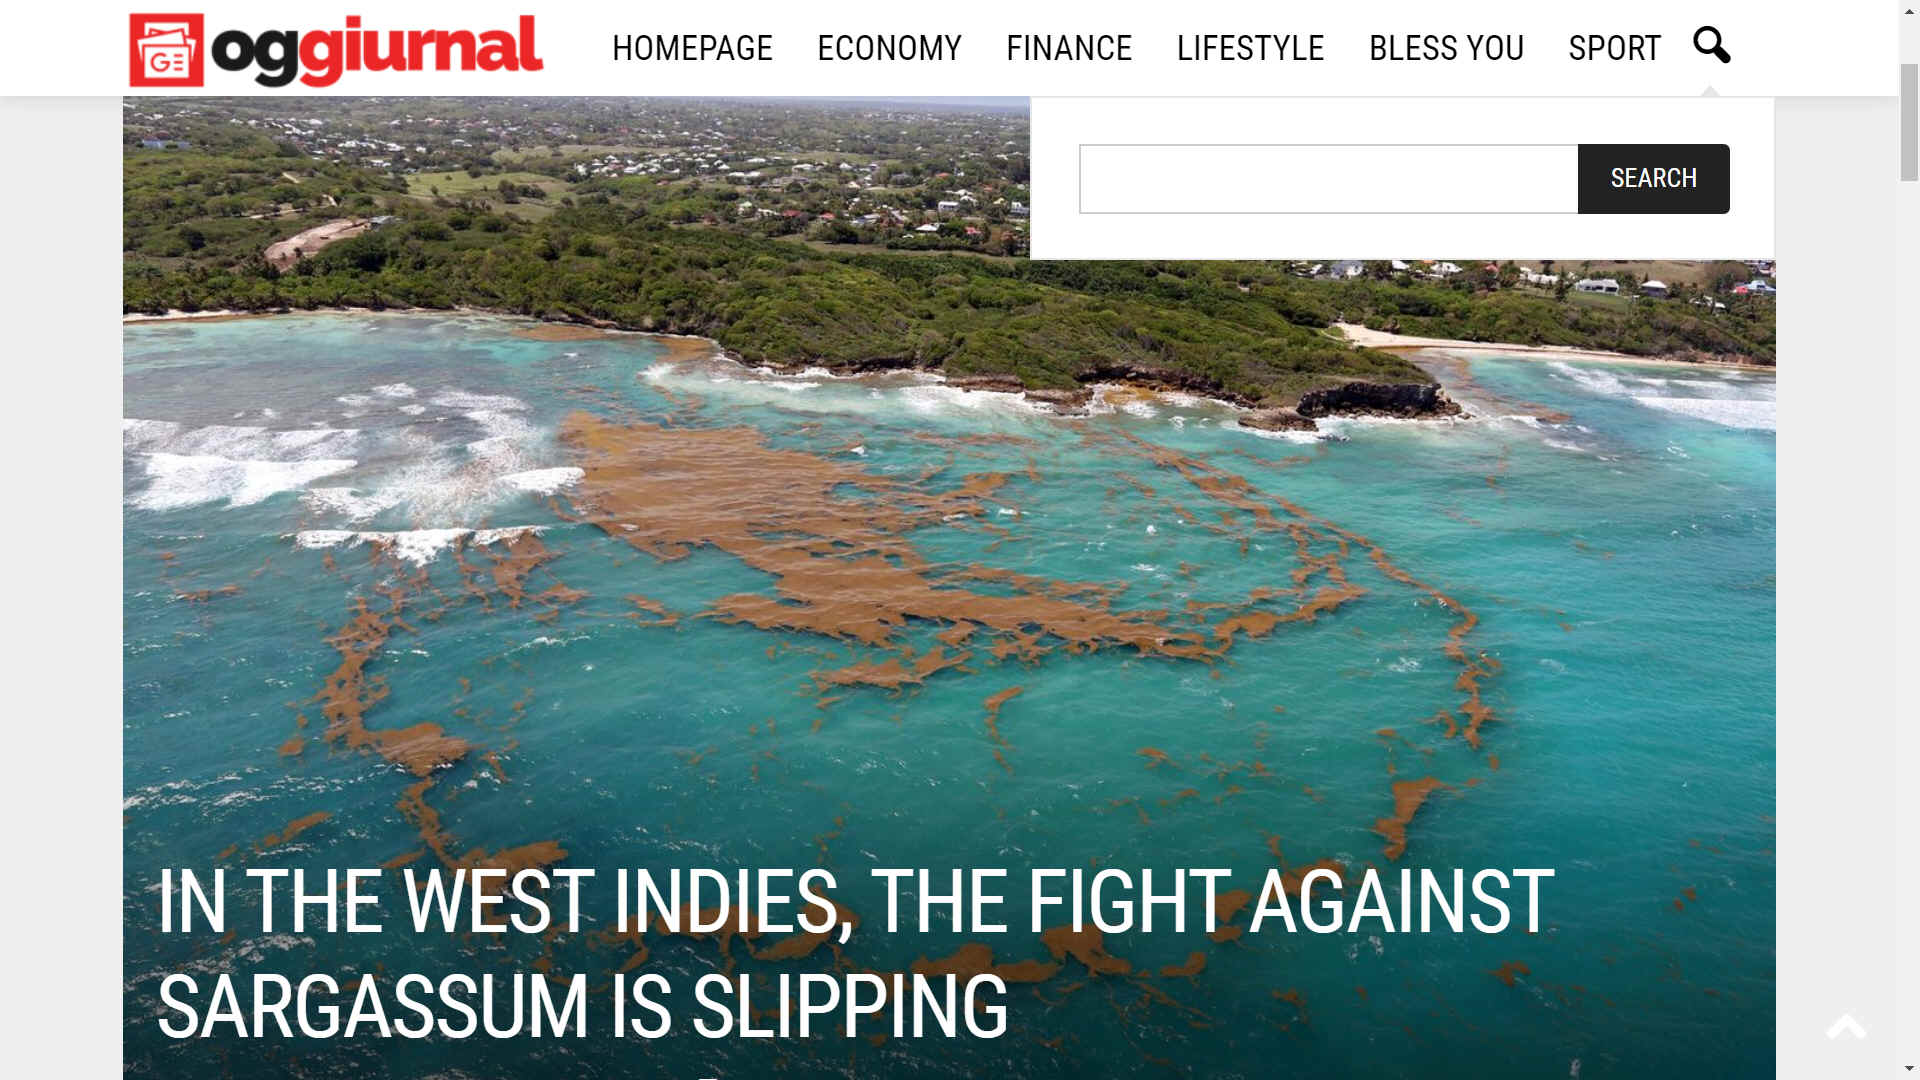 OG Giiurnal - In the West Indies, the fight against sargassum is slipping